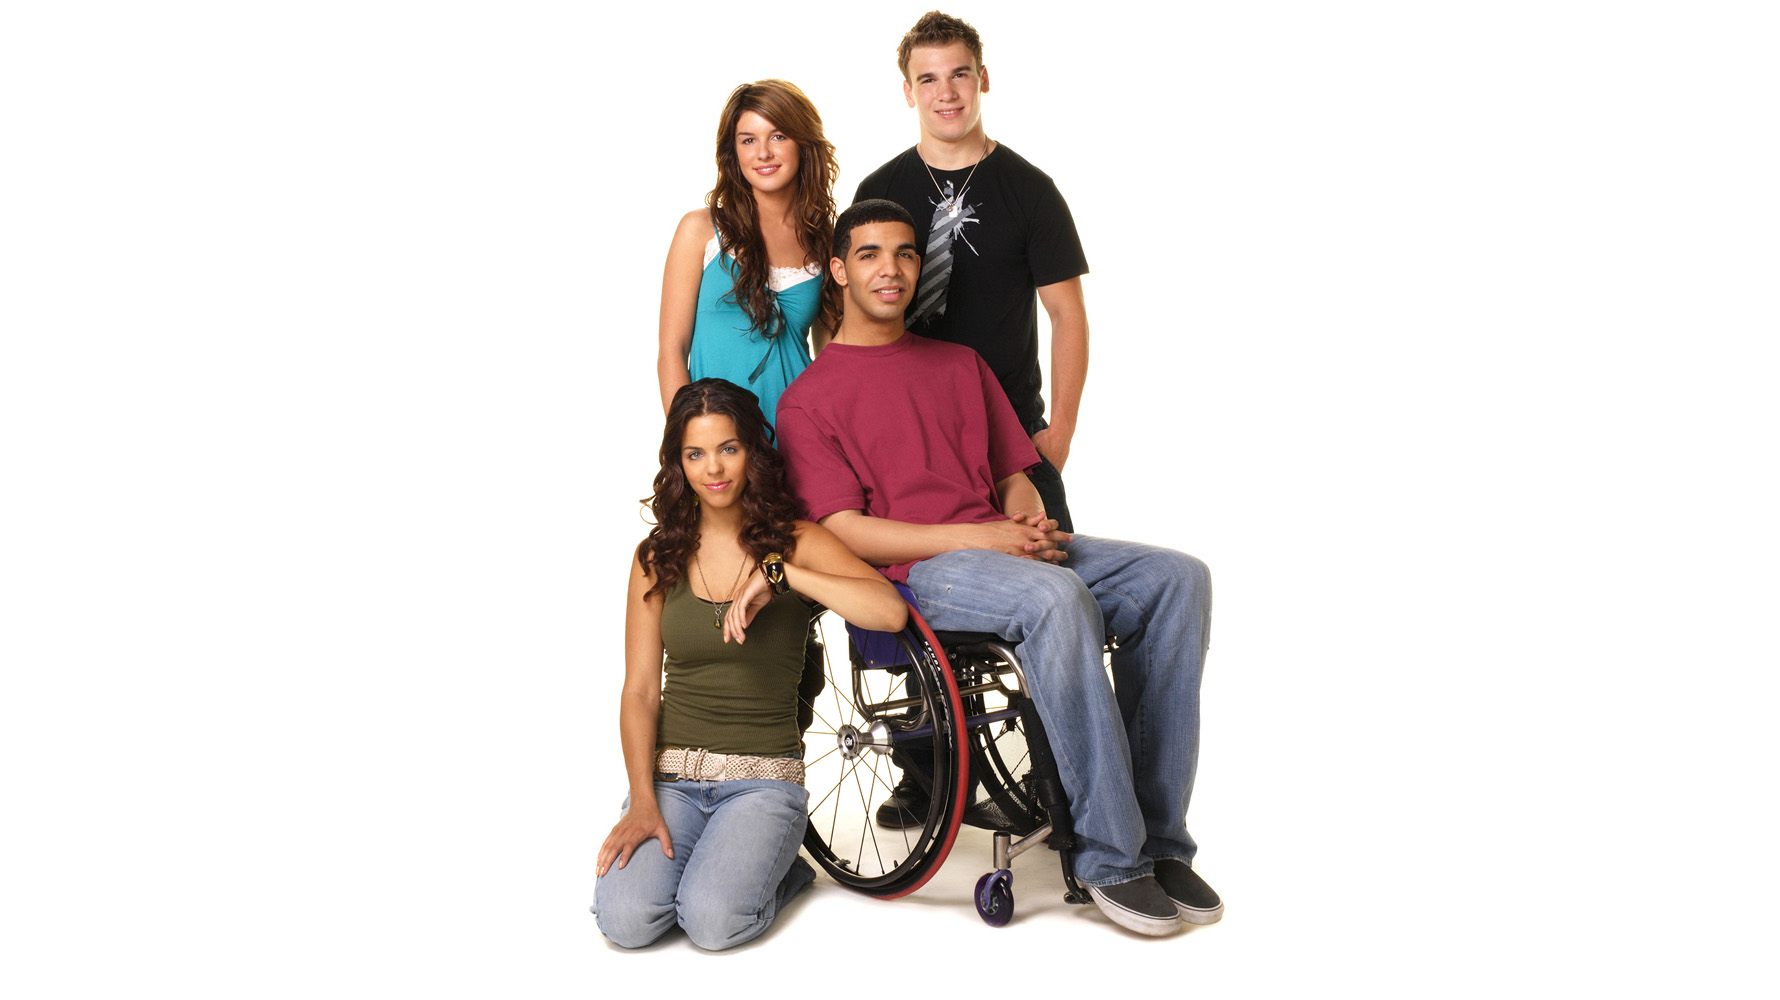 New Degrassi series put on hold after HBO Max pulls out